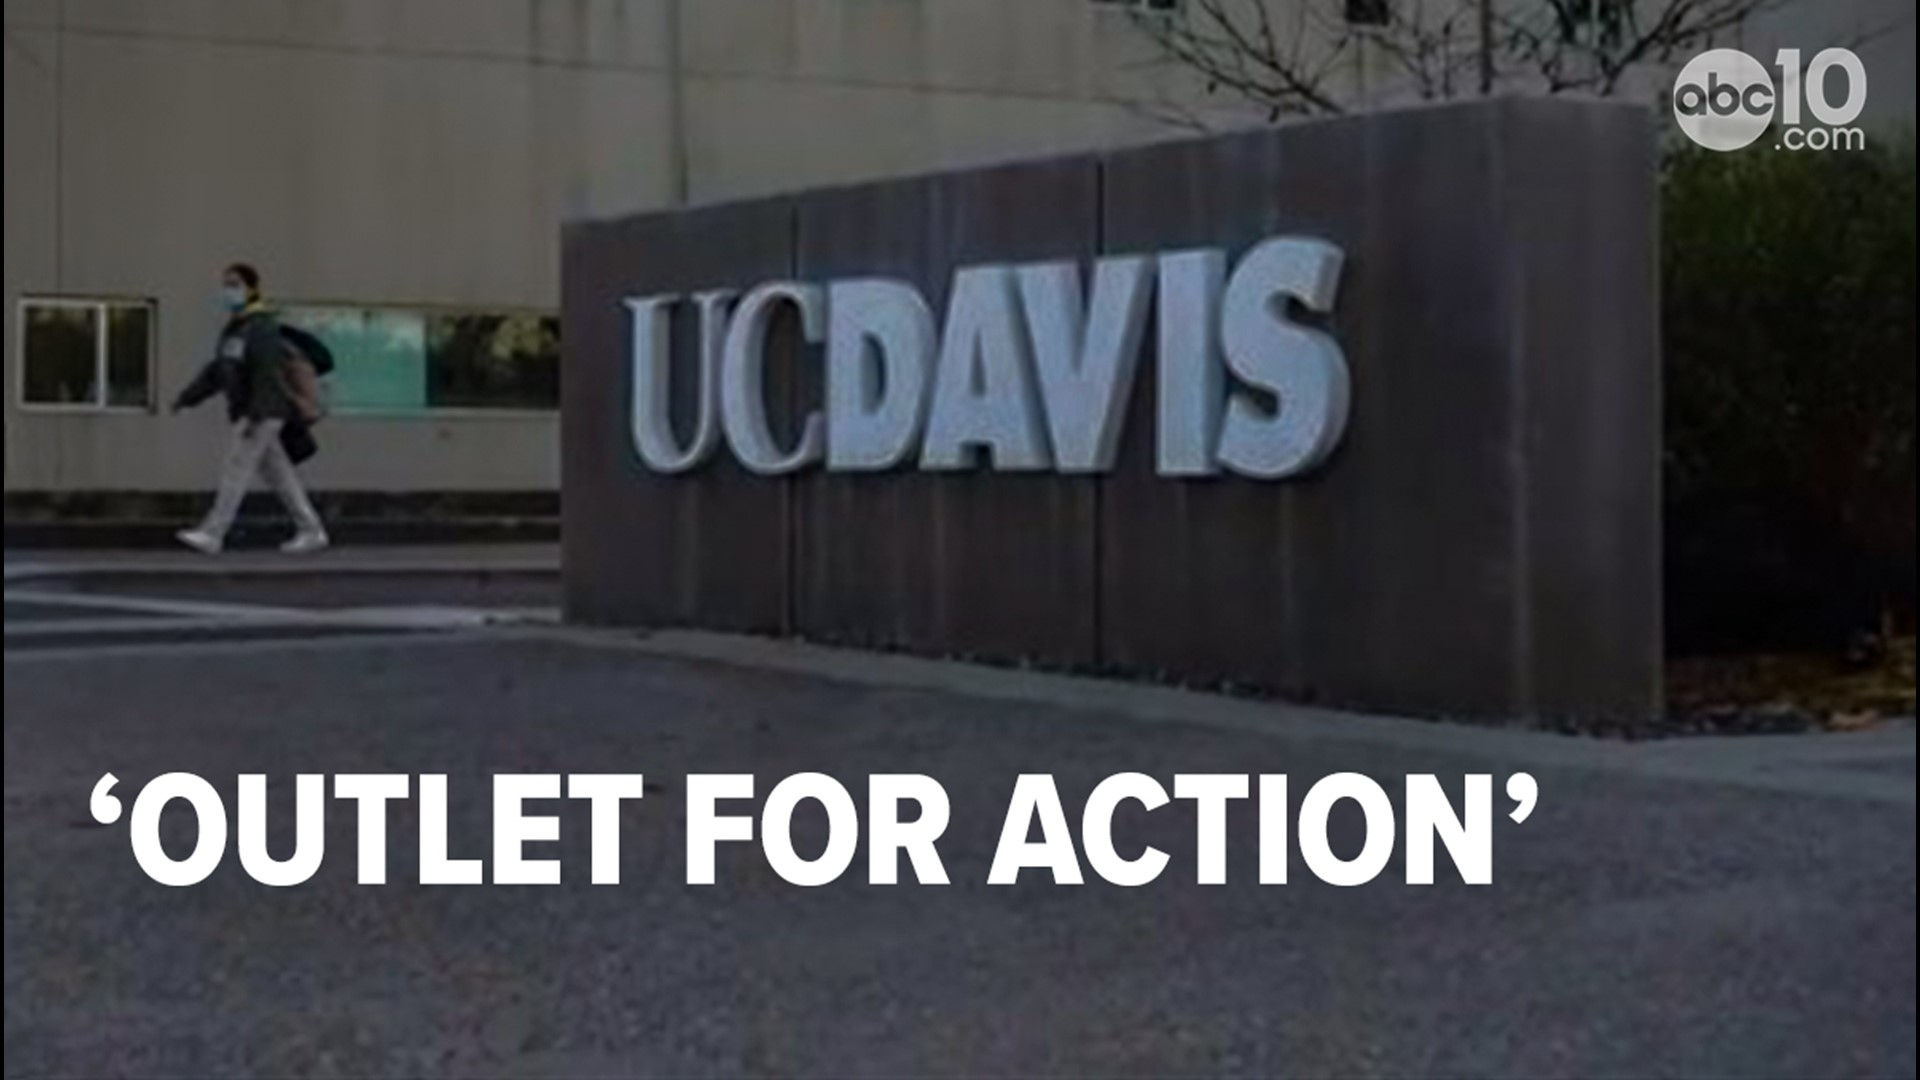 Students at UC Davis are calling for action after a pair of California mass shootings in recent weeks, and they will uplift AAPI students.